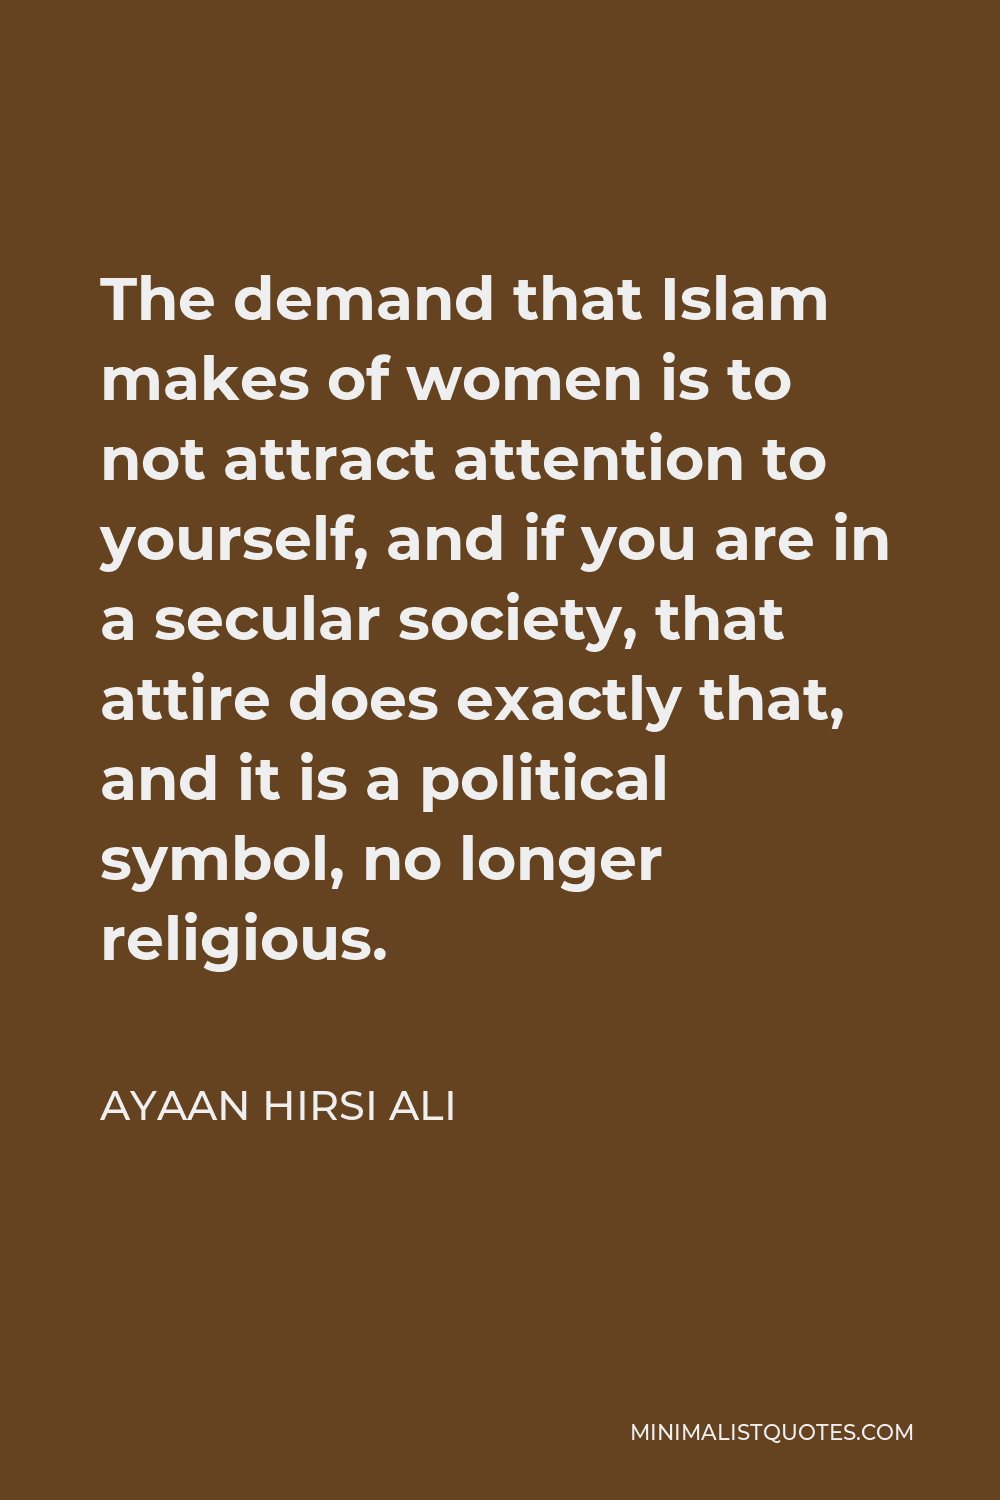 Ayaan Hirsi Ali Quote - The demand that Islam makes of women is to not attract attention to yourself, and if you are in a secular society, that attire does exactly that, and it is a political symbol, no longer religious.